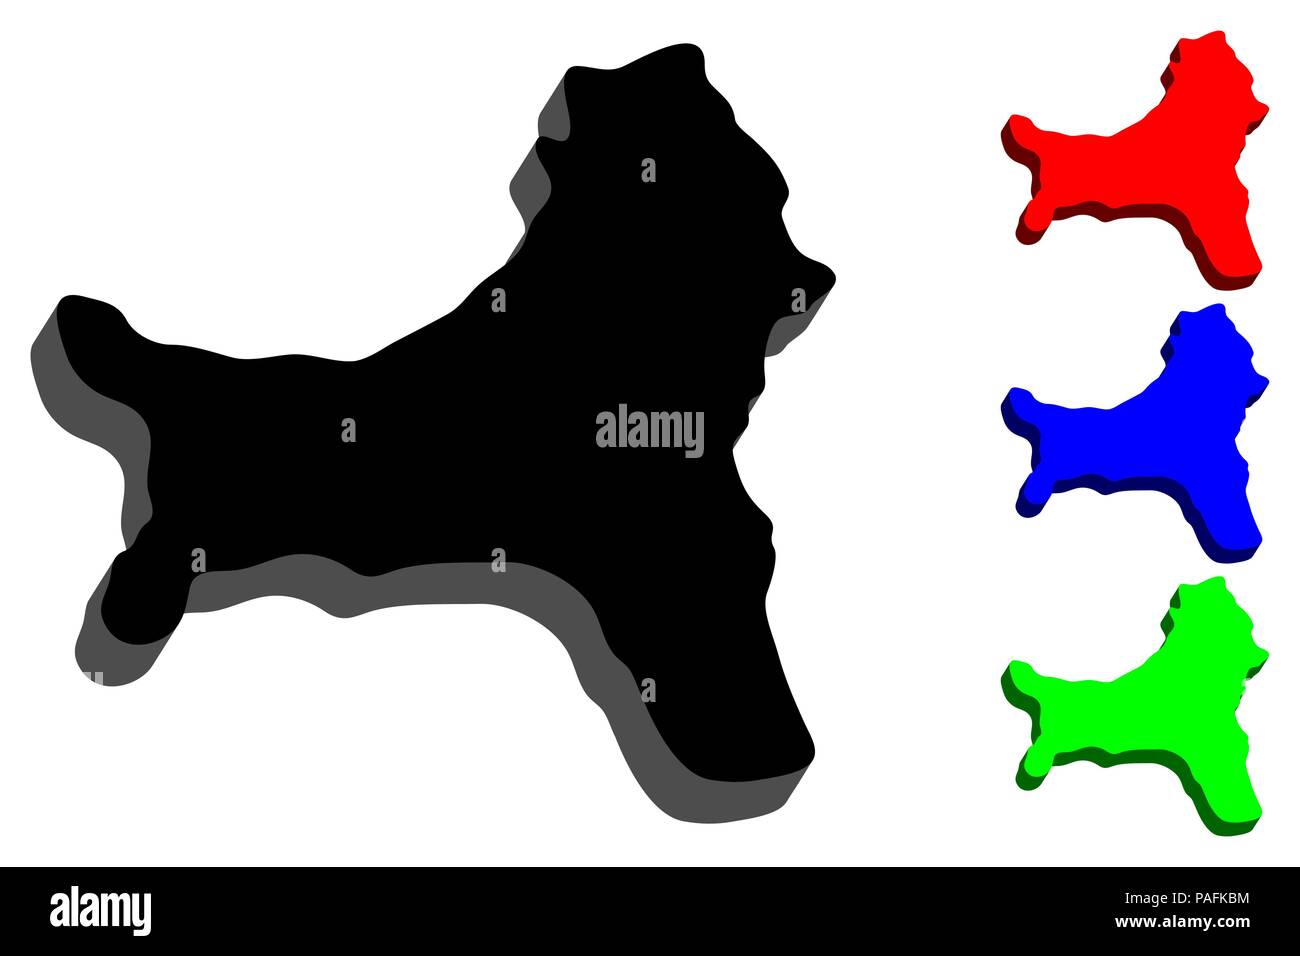 3D map of Christmas Island (Territory of Christmas Island, Australian external territory) - black, red, blue and green - vector illustration Stock Vector